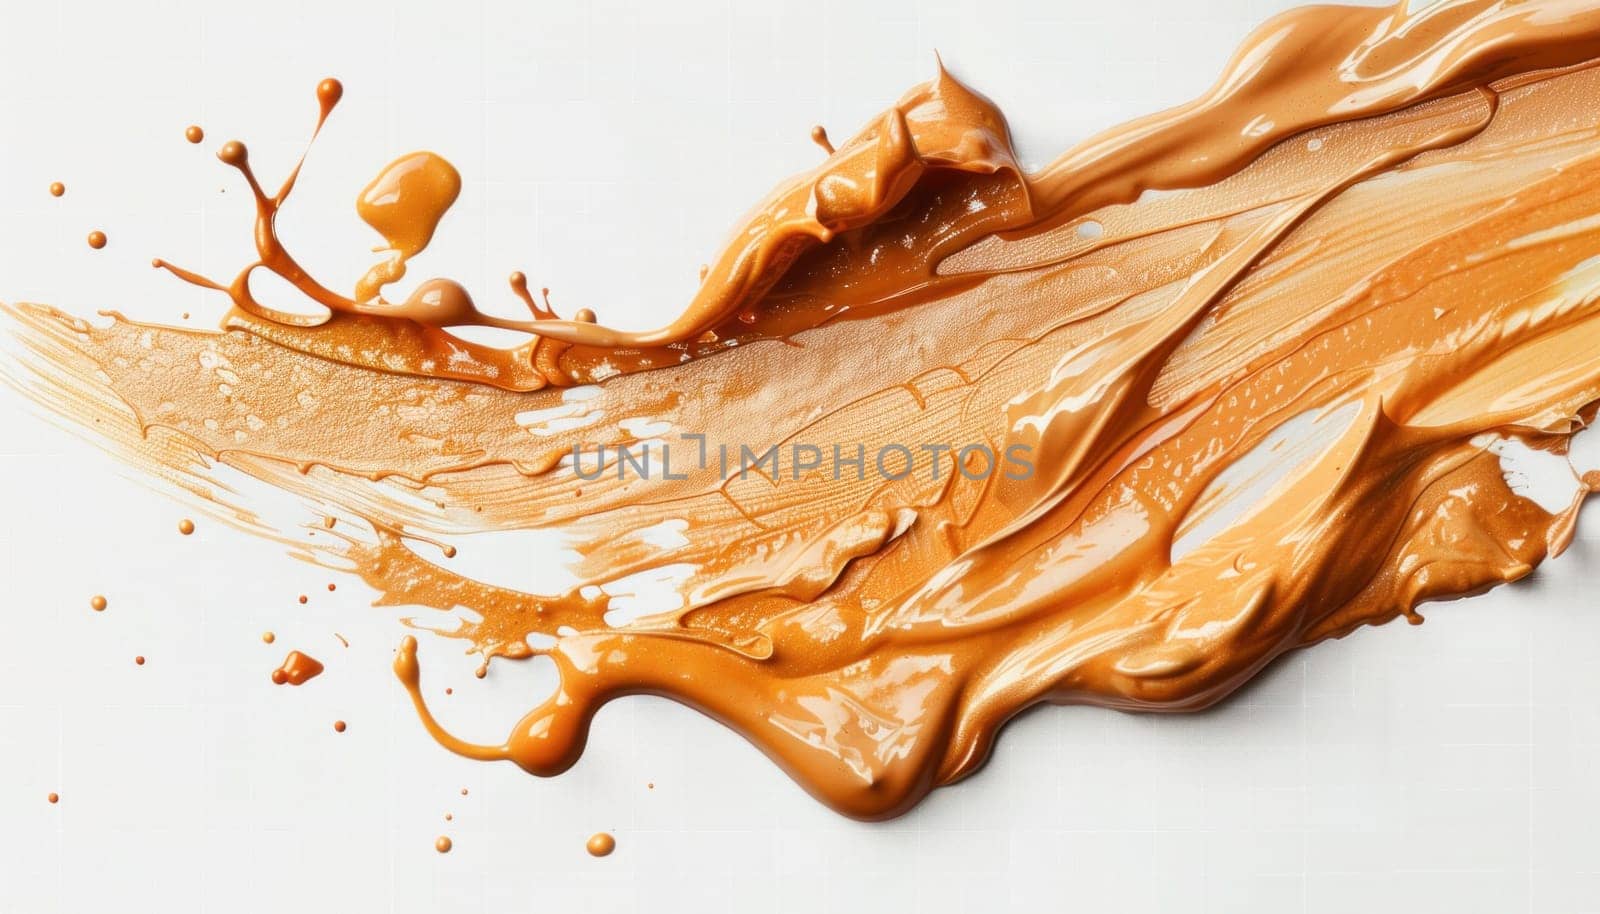 Highly detailed image of an orange paint splatter on white background, displaying intricate artistry and contrast